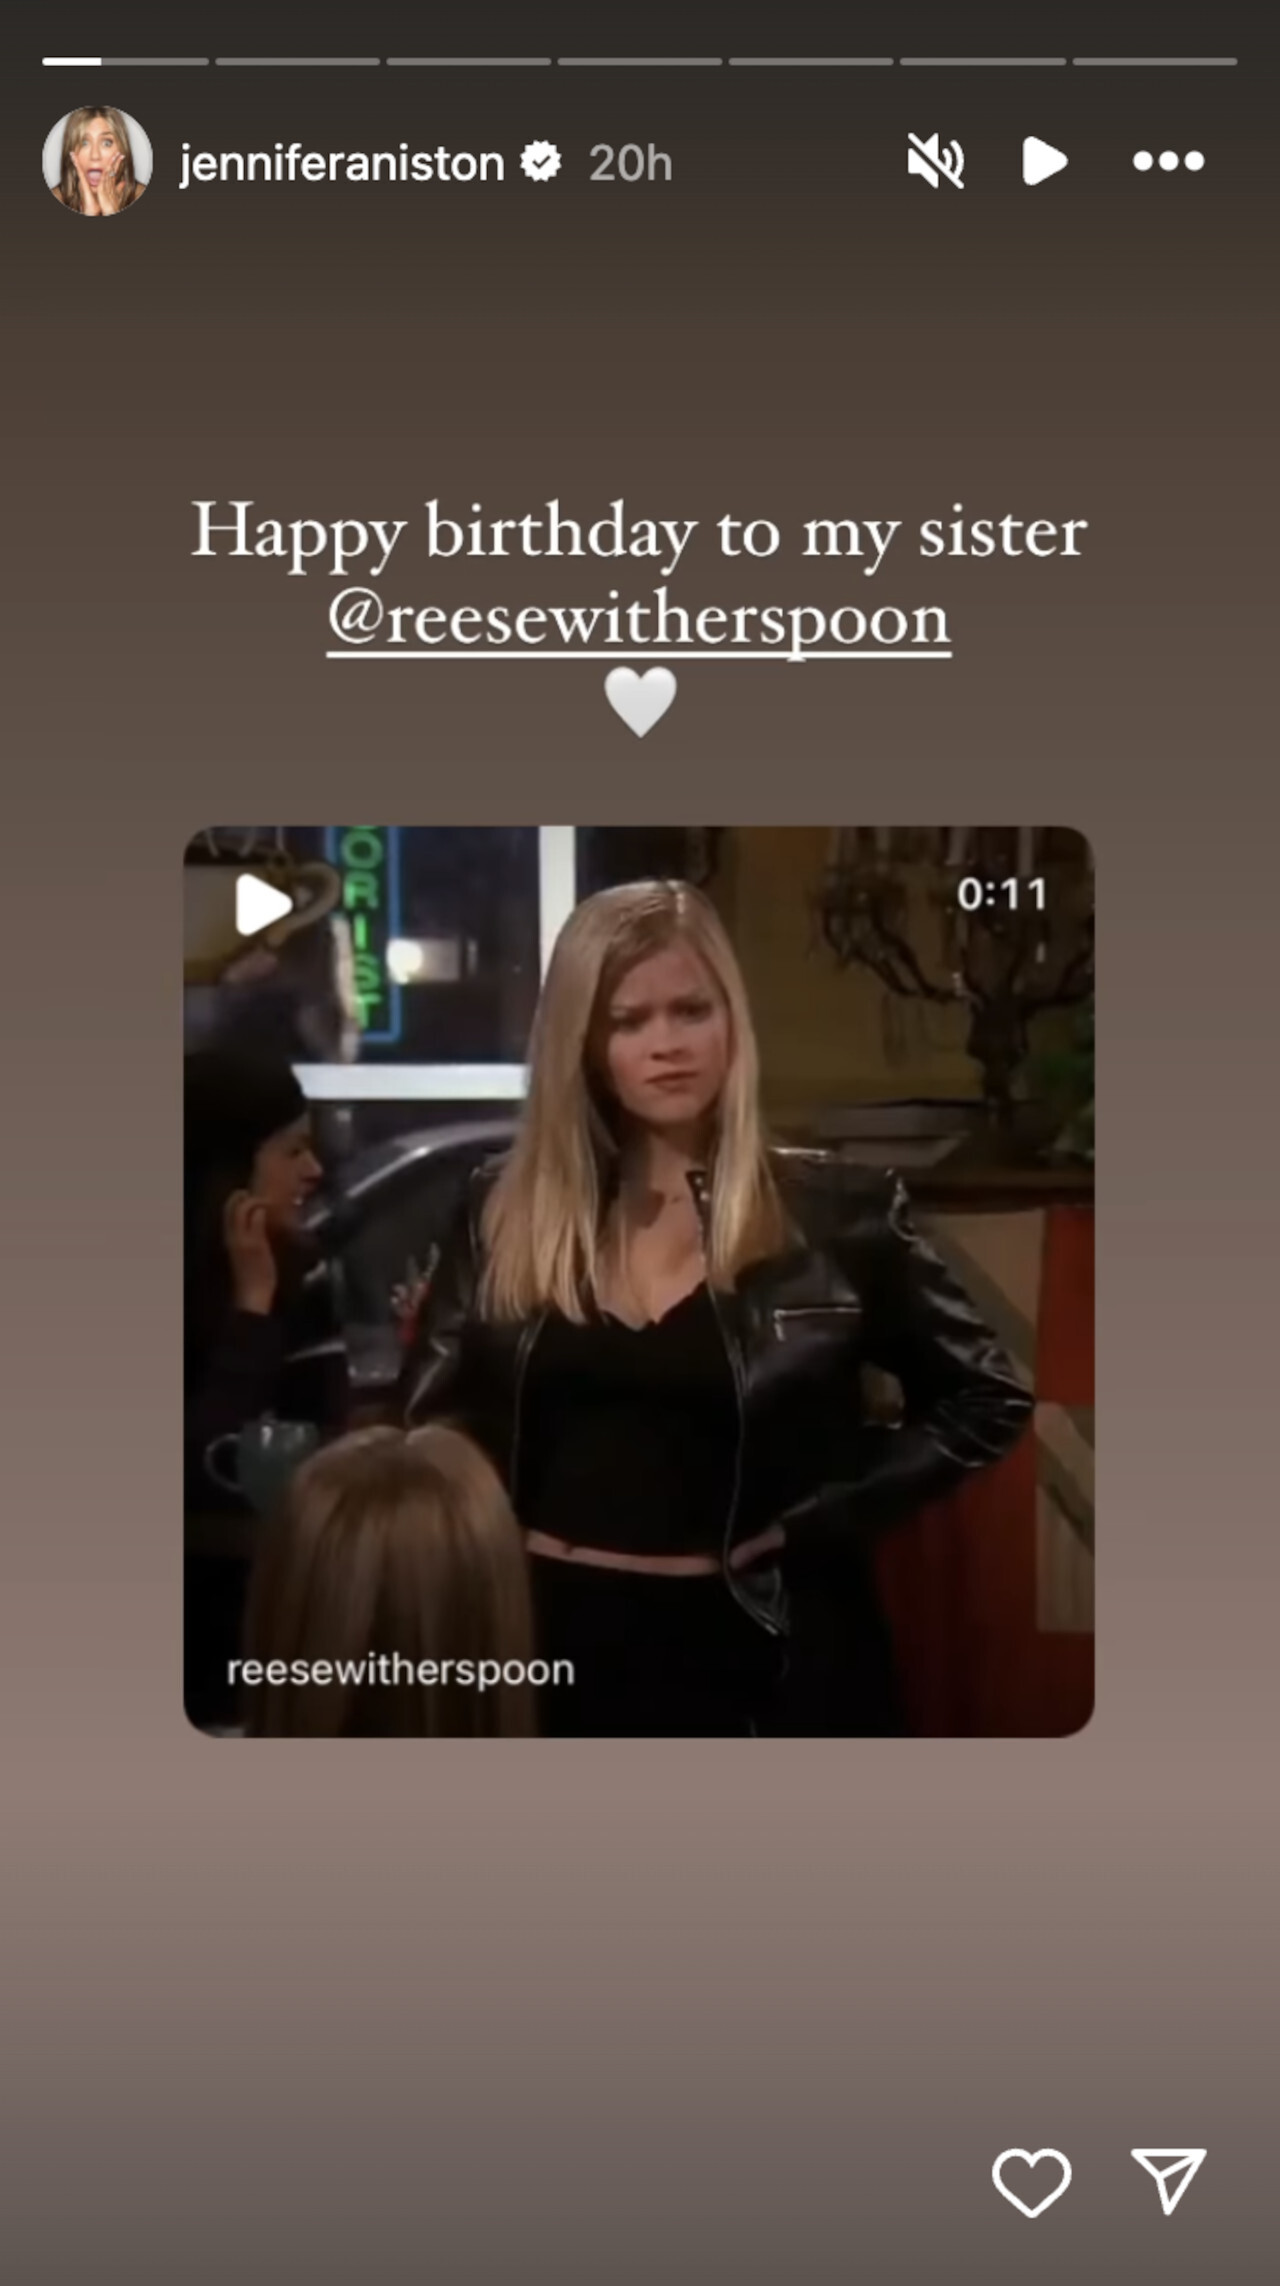 Jennifer Aniston shares Friends birthday post for Reese Witherspoon.